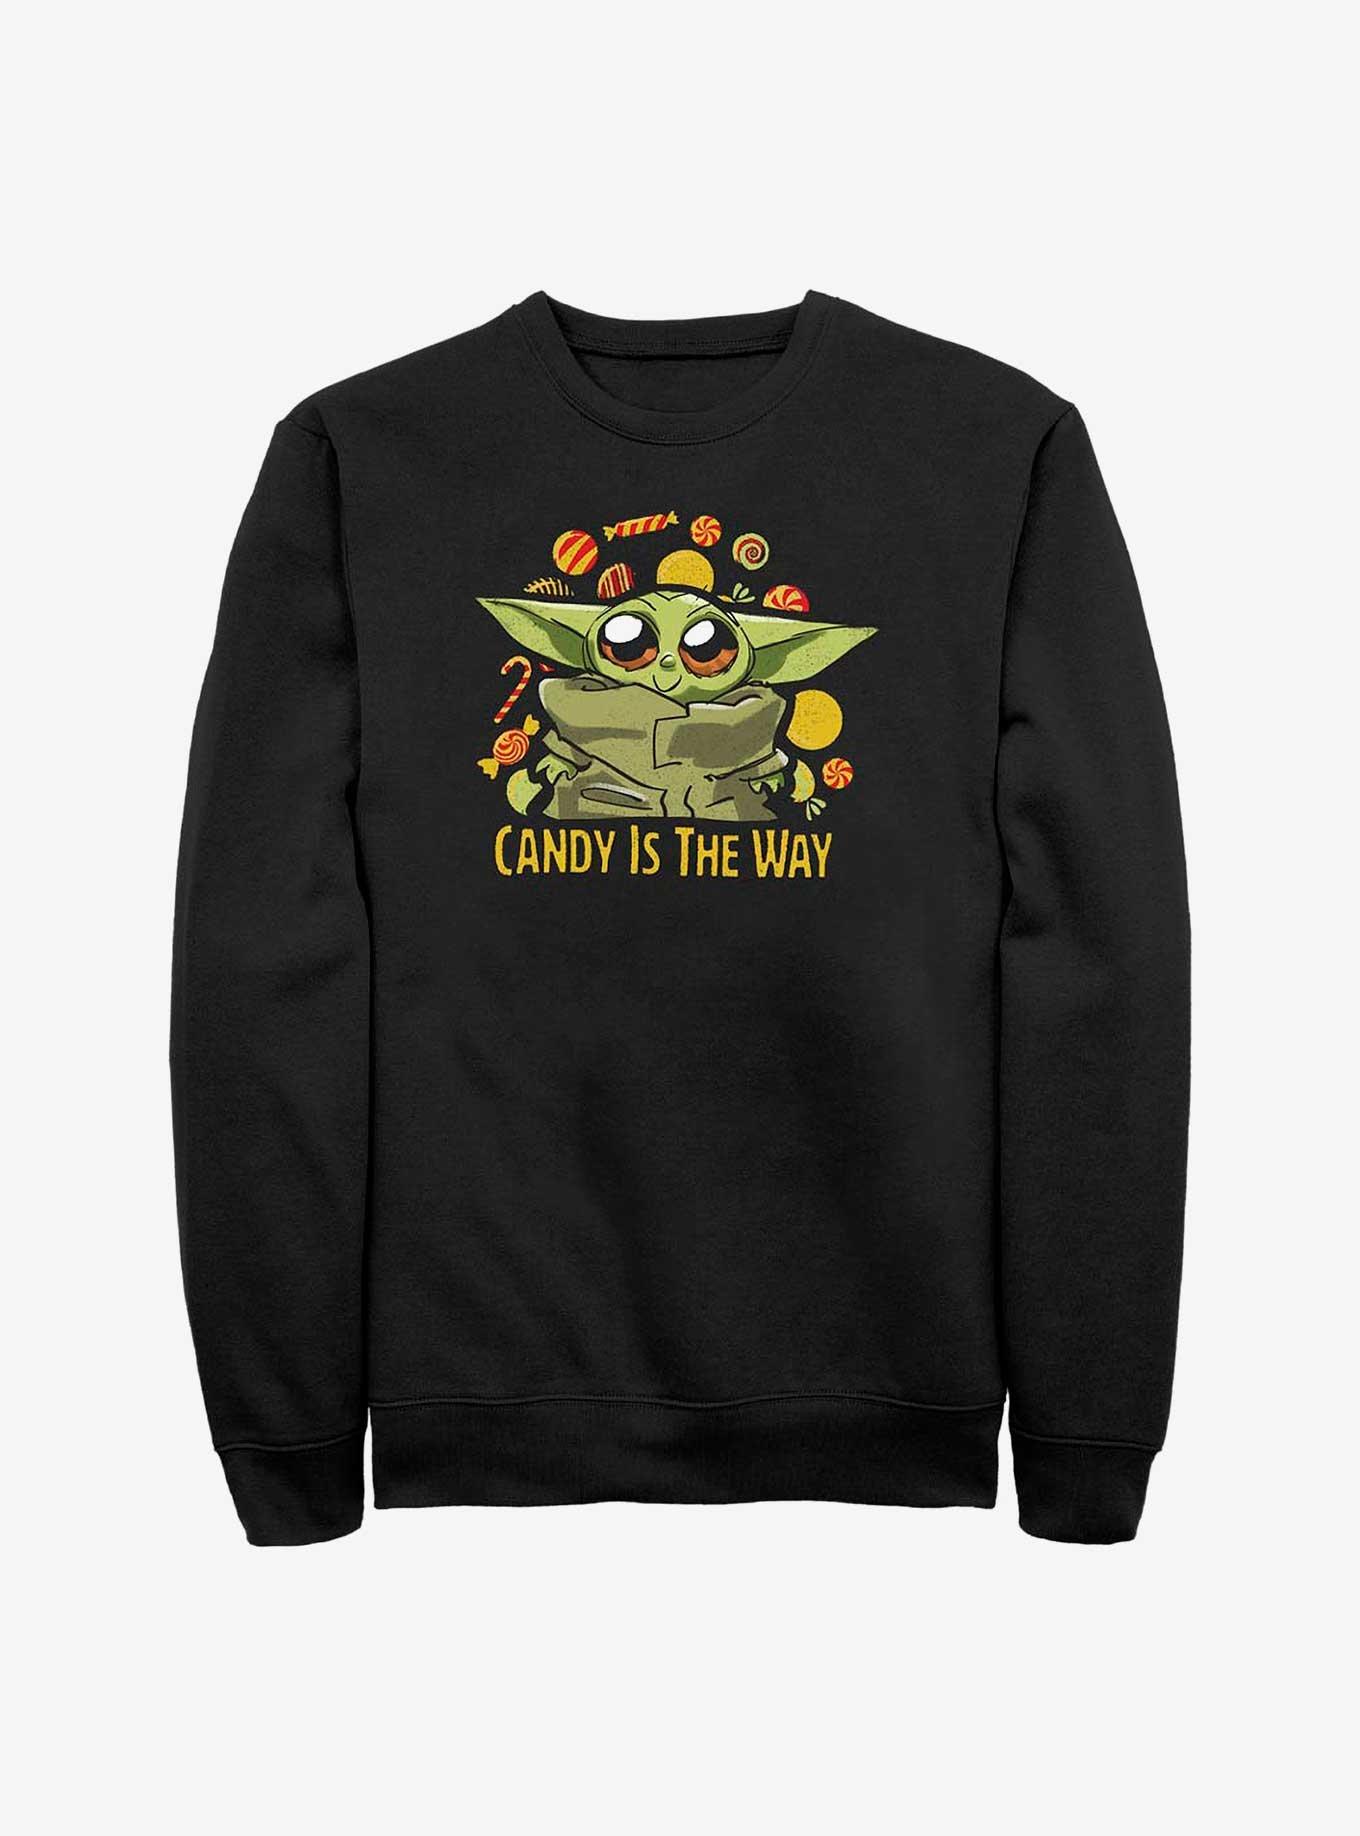 Star Wars The Mandalorian The Child Candy Is The Way Sweatshirt, BLACK, hi-res